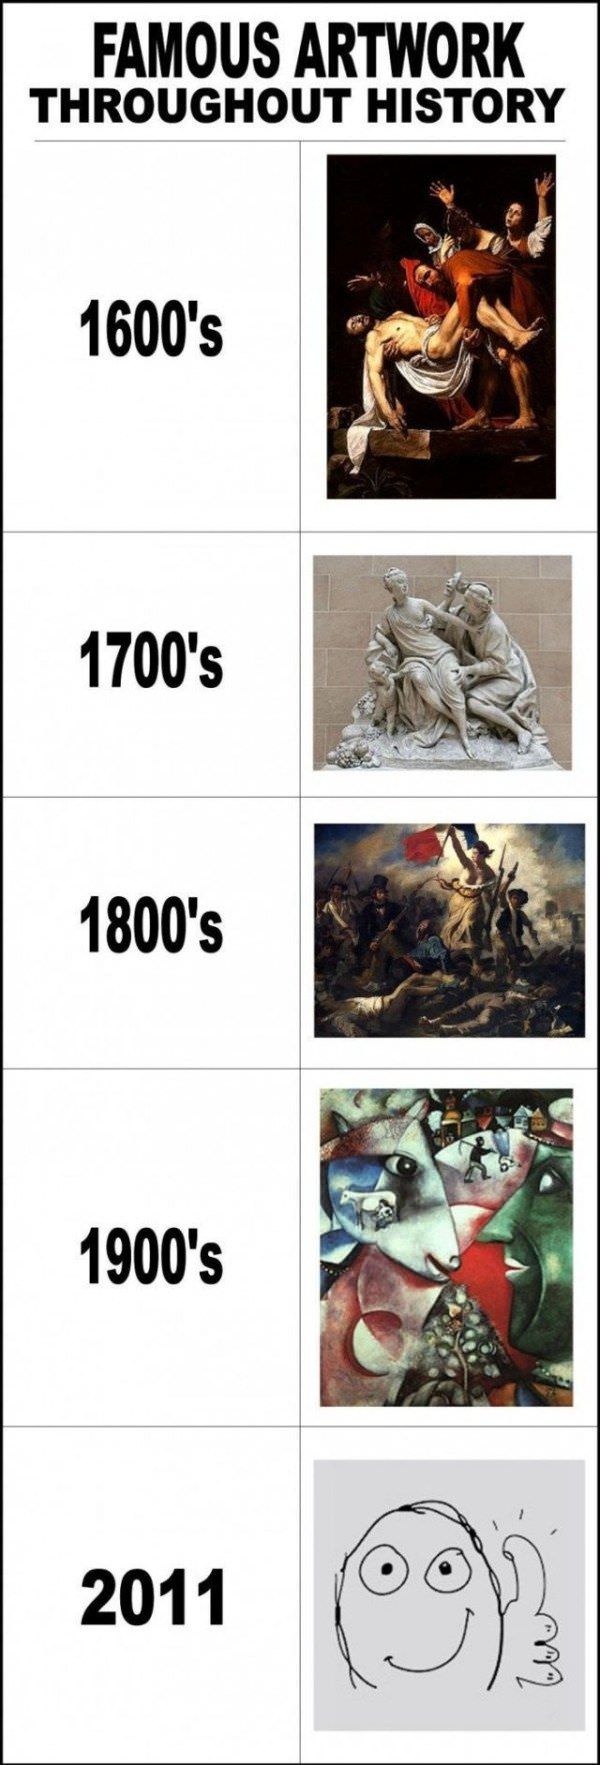 Famous Artwork Throughout History